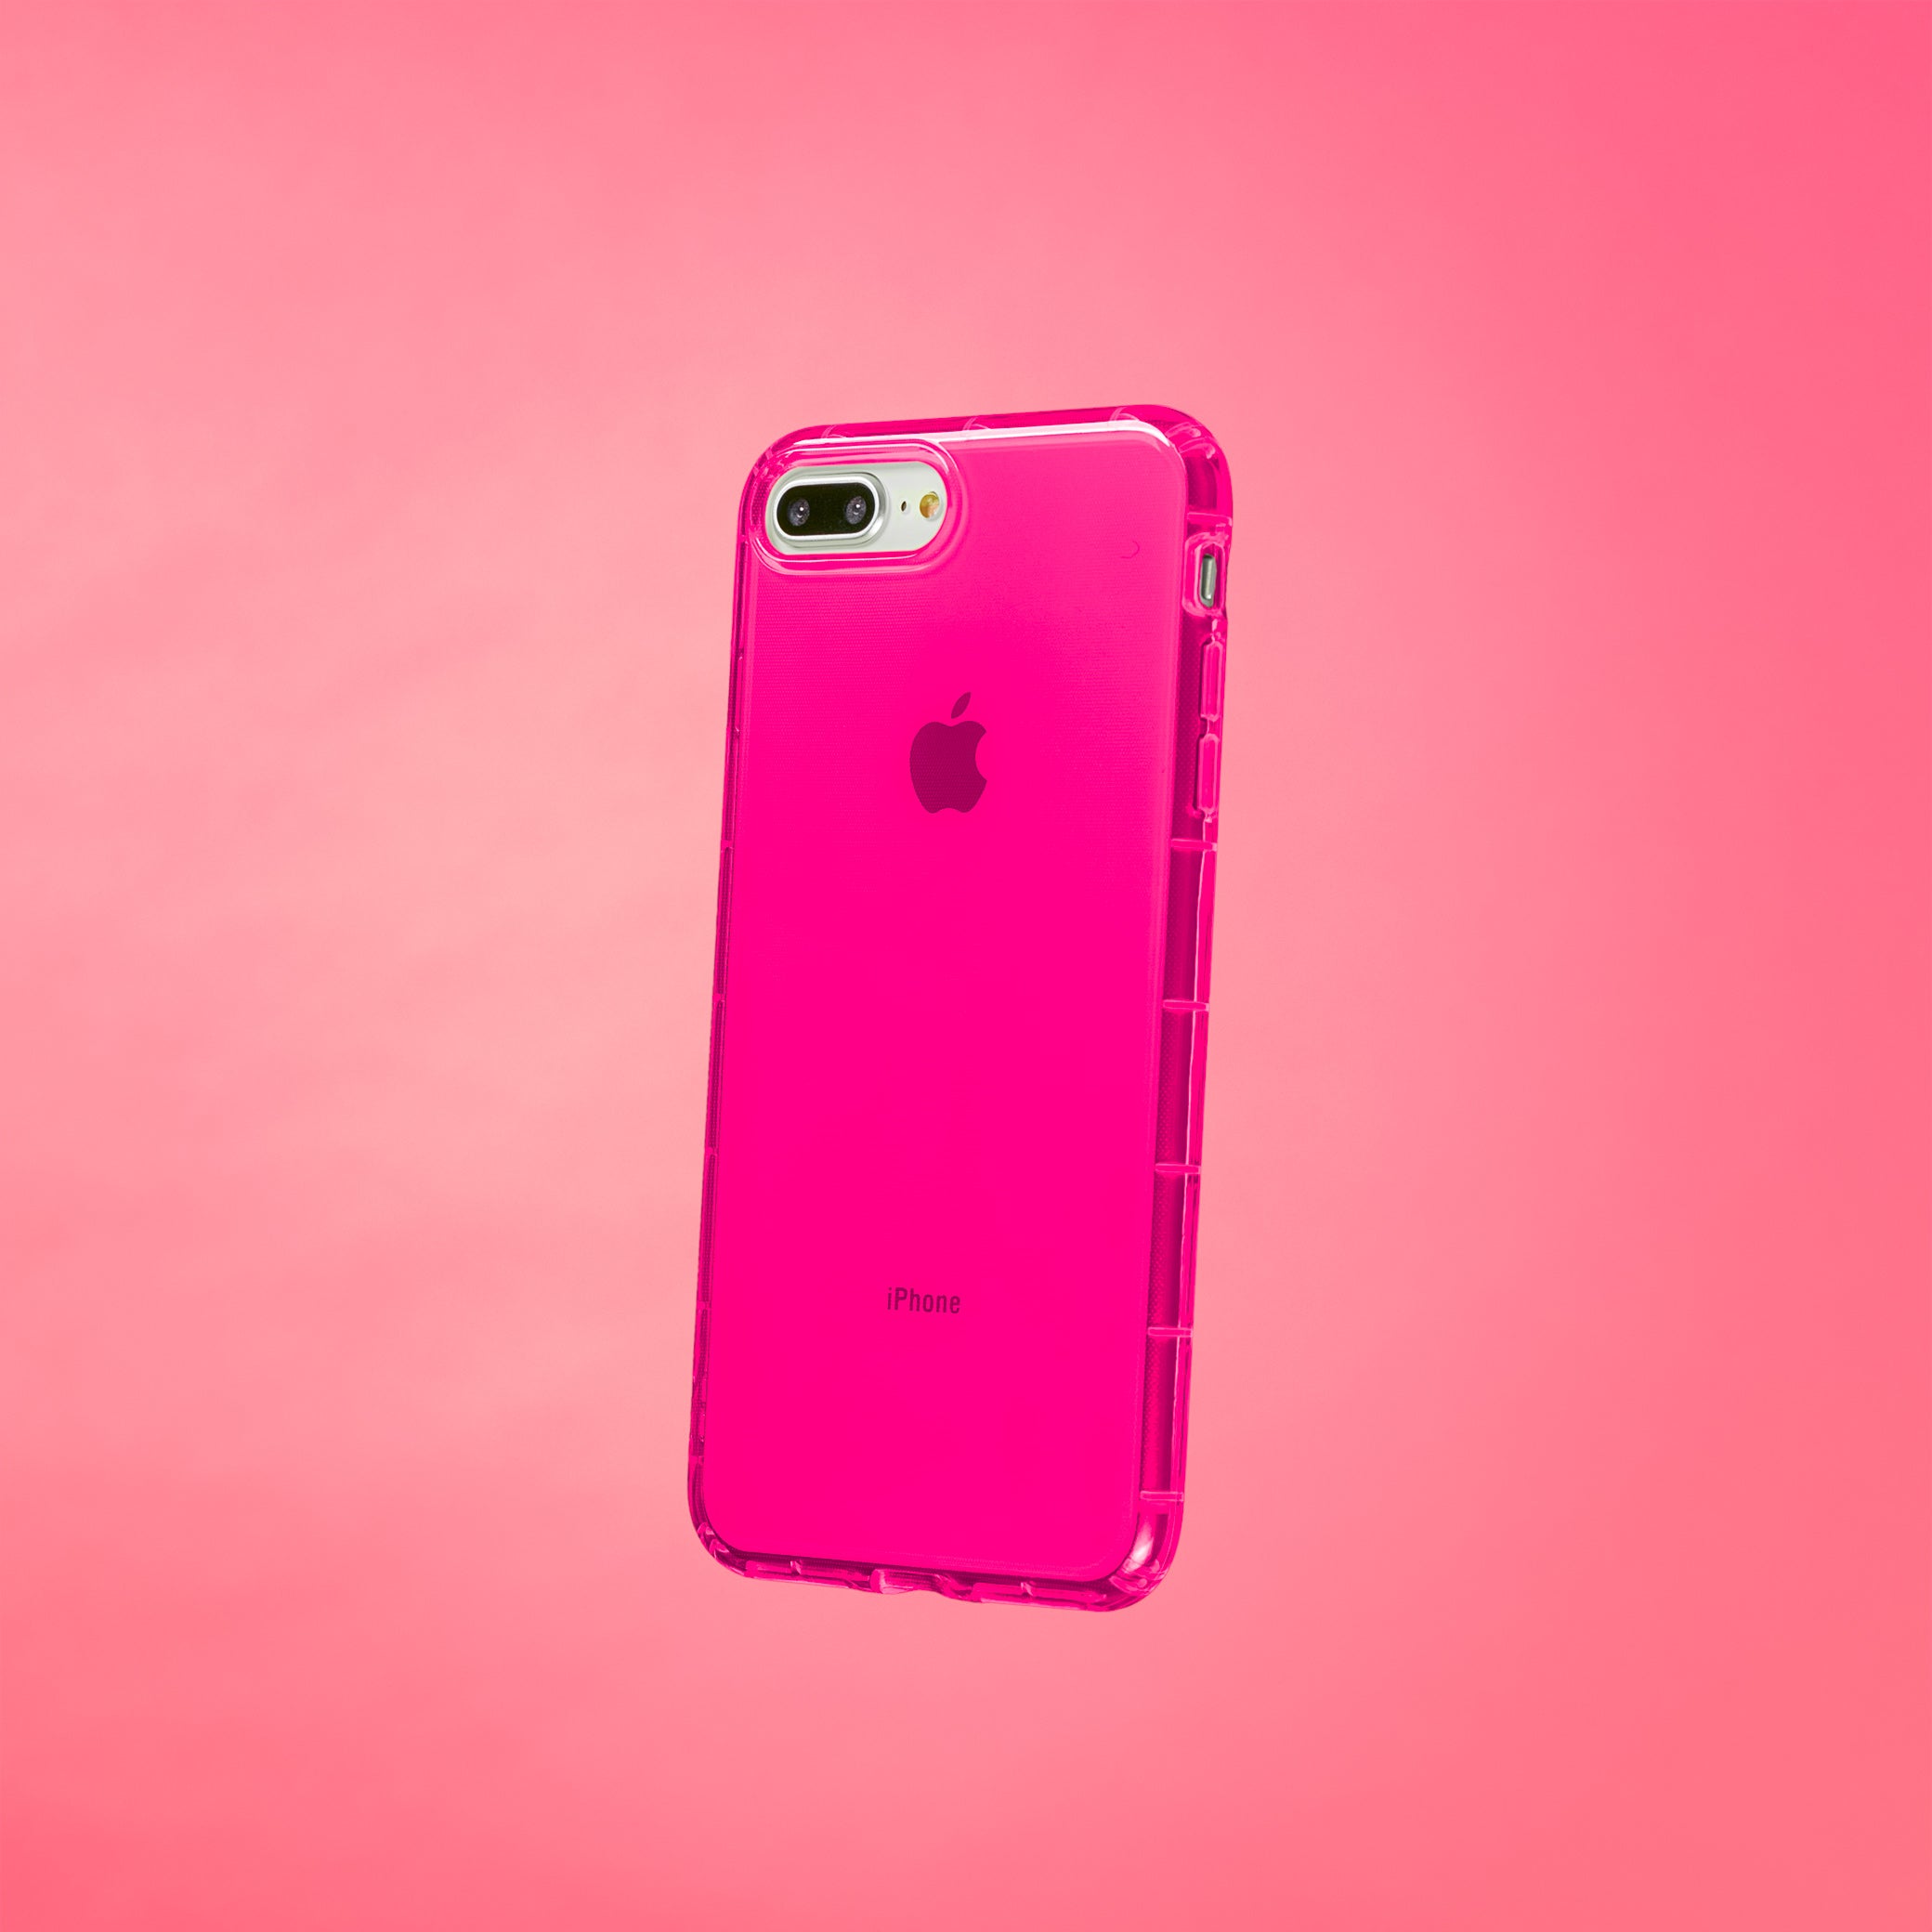 Highlighter Case for iPhone 8 Plus & iPhone 7 Plus - Eye-Catching Hot Pink